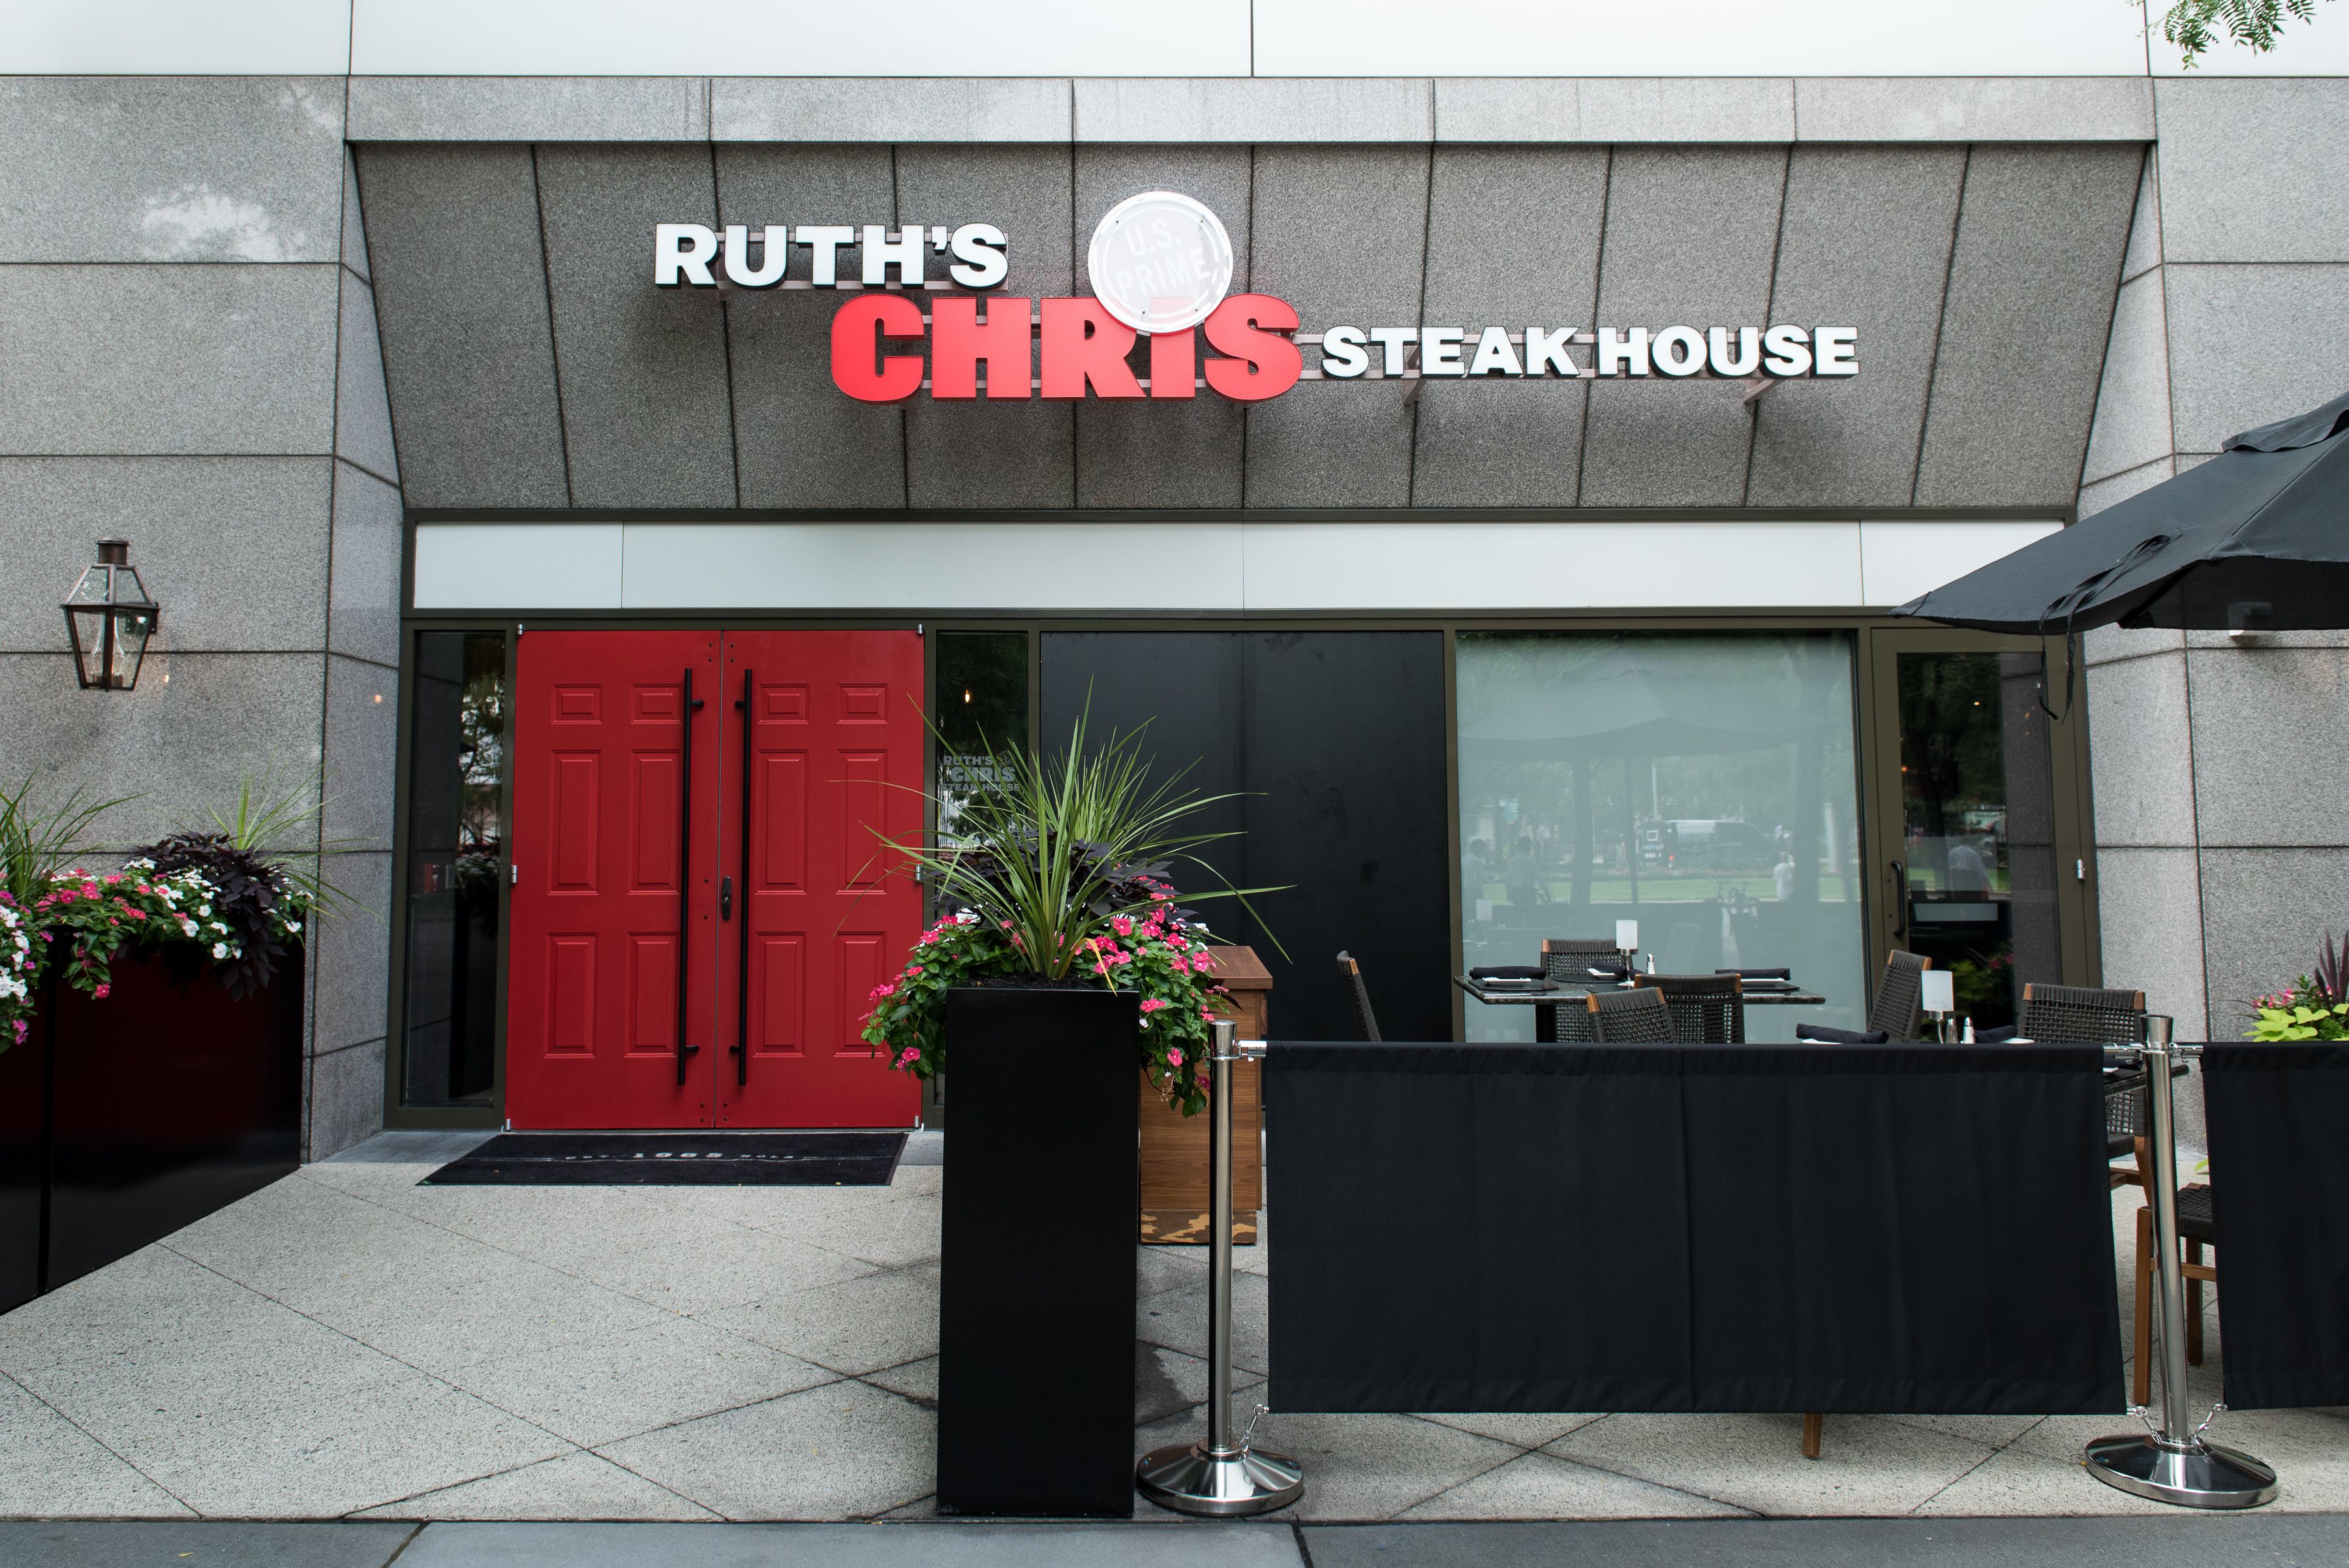 Chains Like Ruth S Chris Potbelly Got Loans Under Small Business